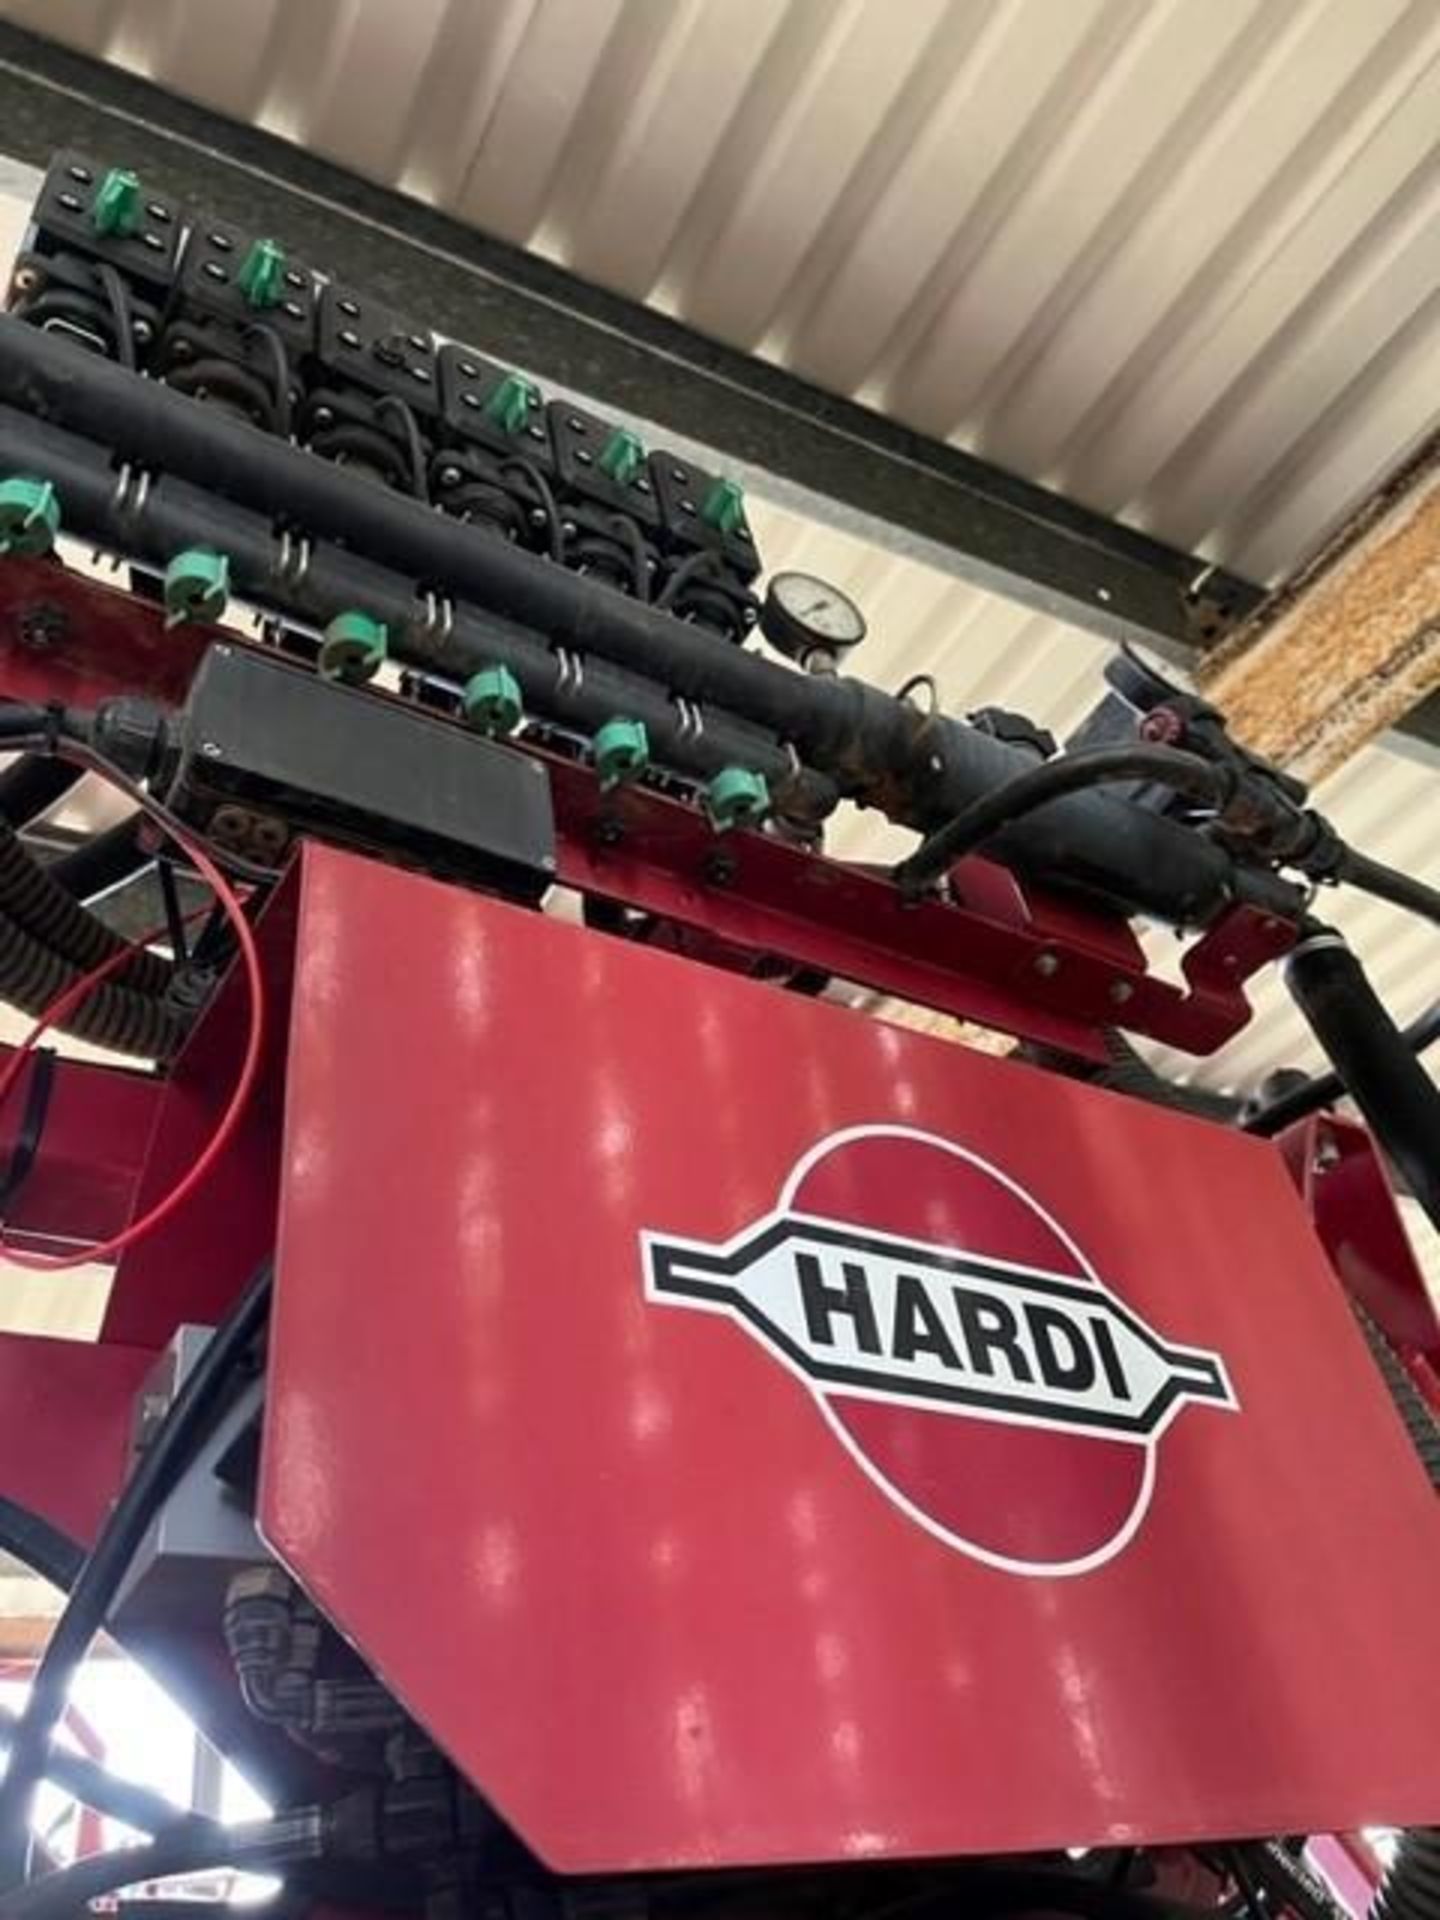 2010 Hardi Navigator 3000 trailed sprayer with 24m delta boom with triplex nozzles. Boom prime and f - Image 8 of 8